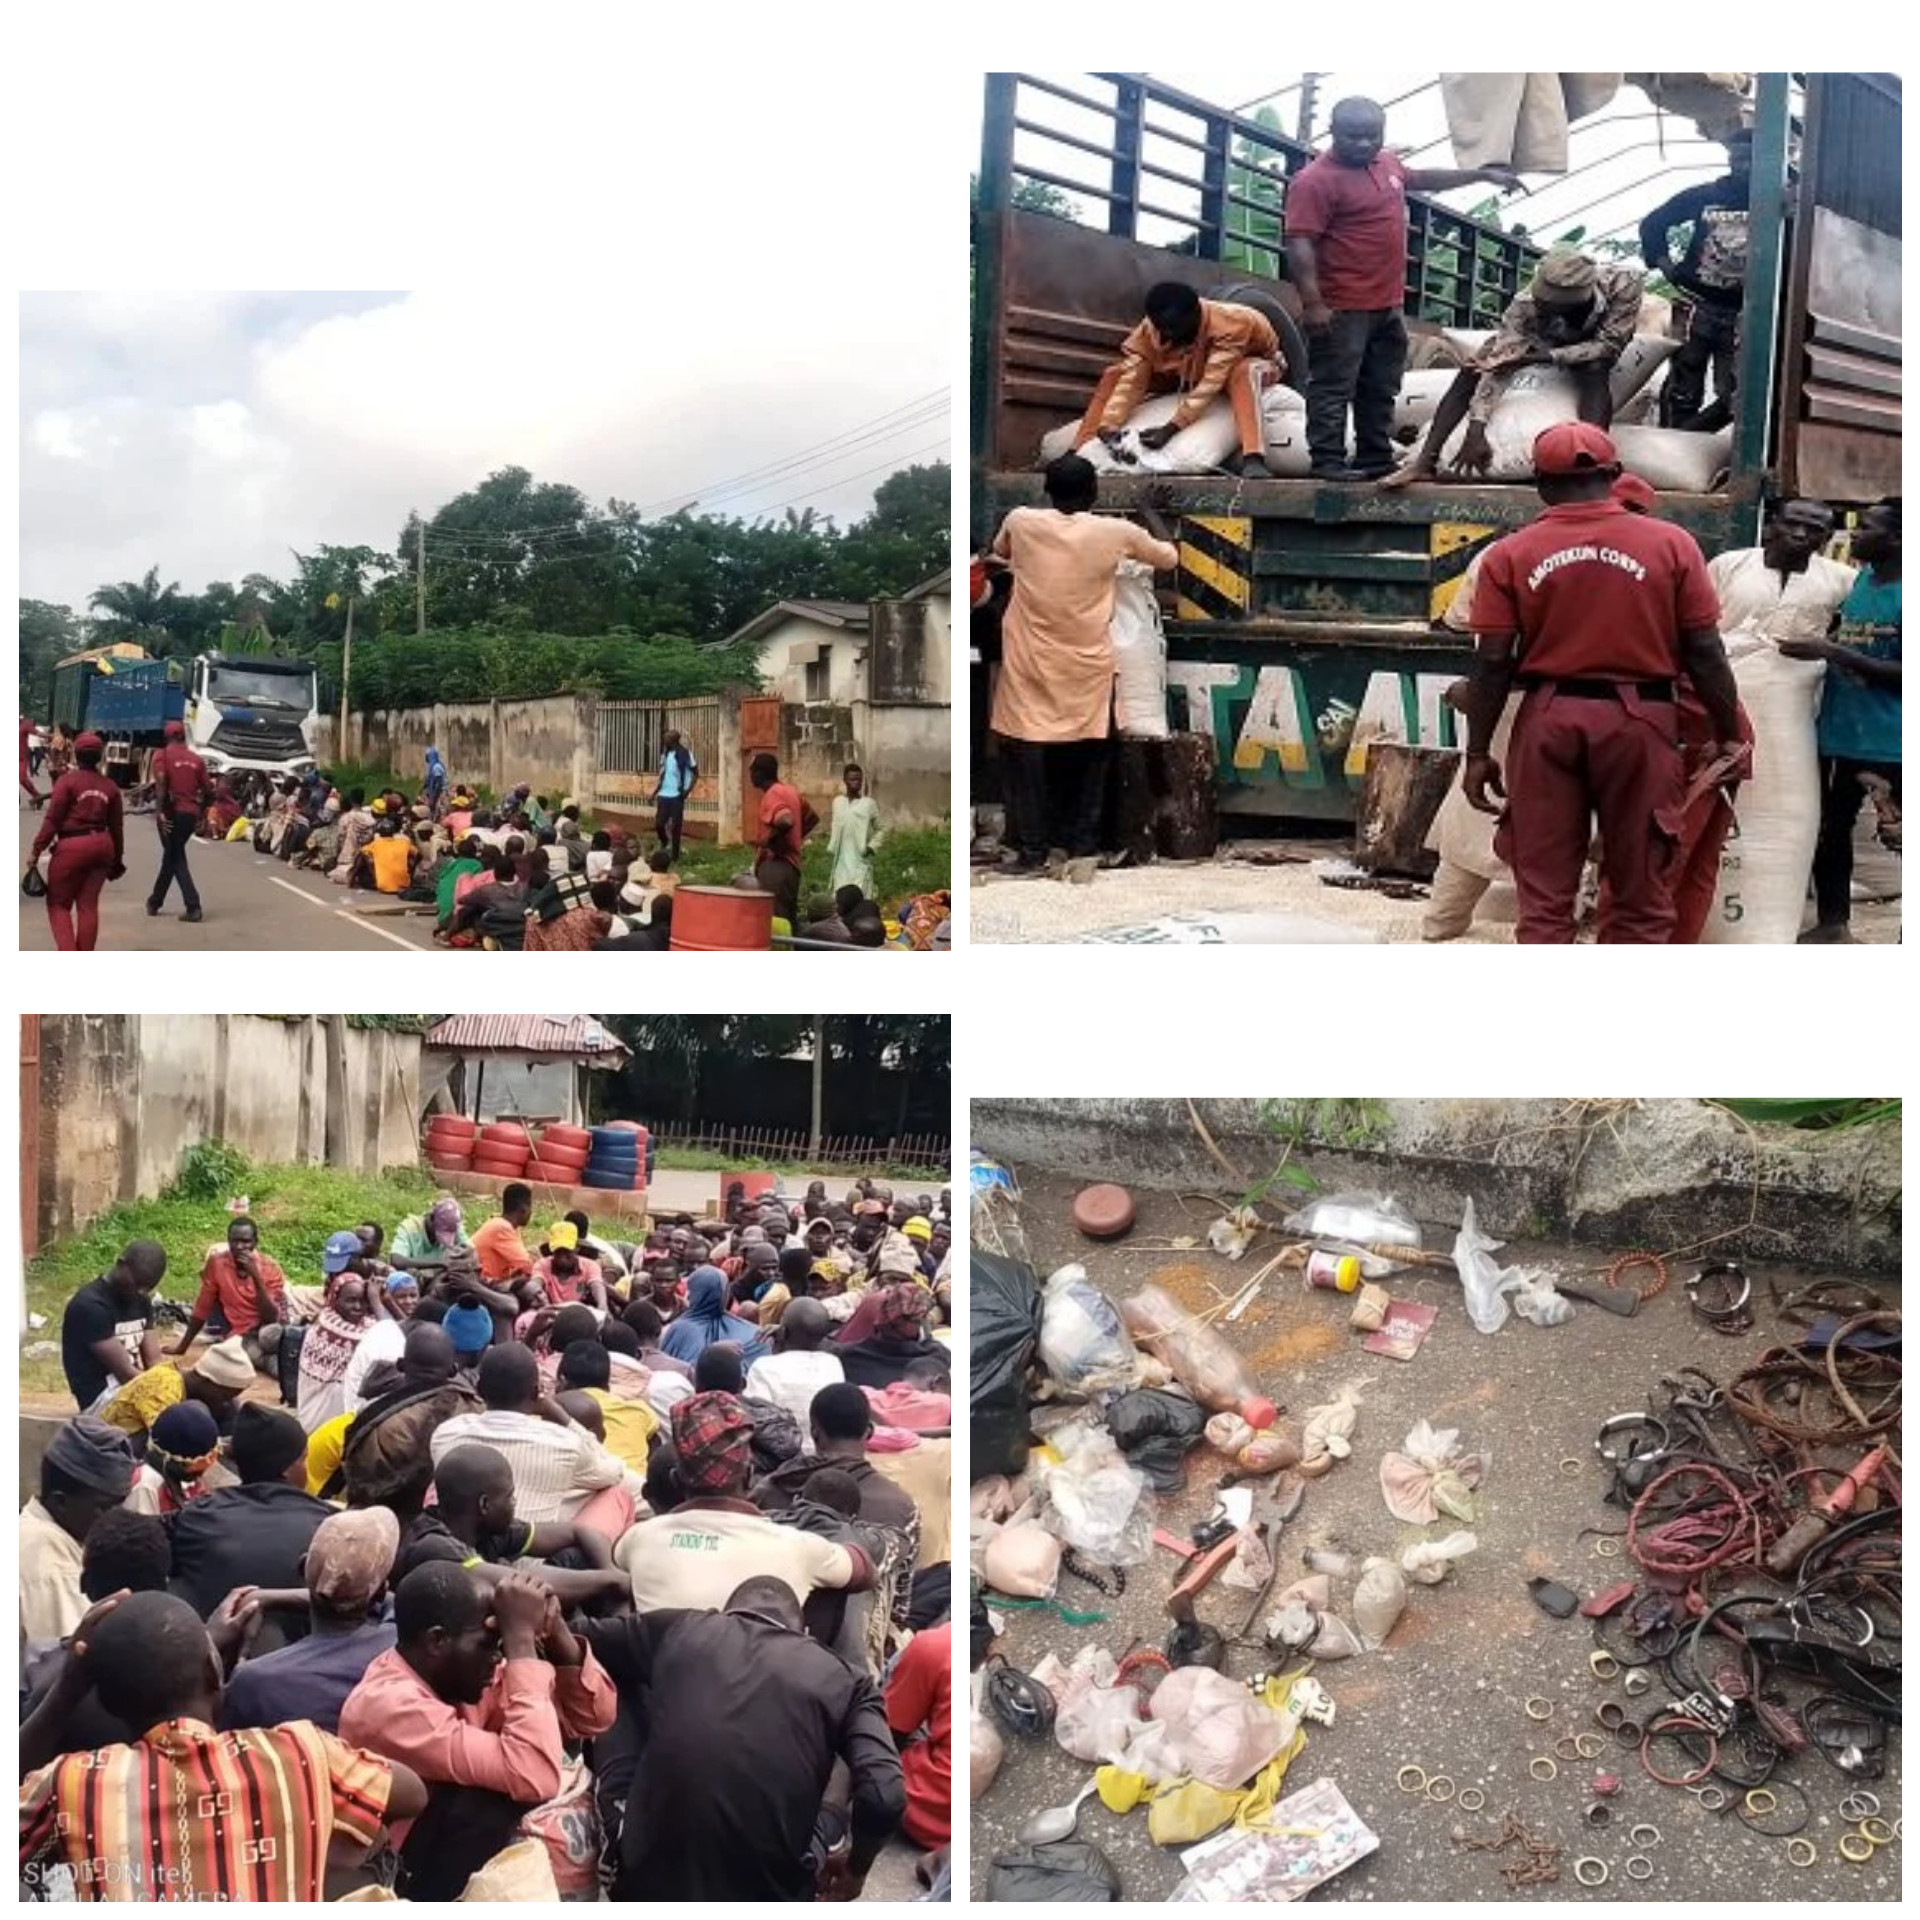 ONDO AMOTEKUN INTERCEPTS TWO TRUCKS CONVEYING 151 SUSPECTED INVADERS WHO HID BEHIND BAGS OF RICE, RECOVERS DANGEROUS CHARMS (PHOTOS)